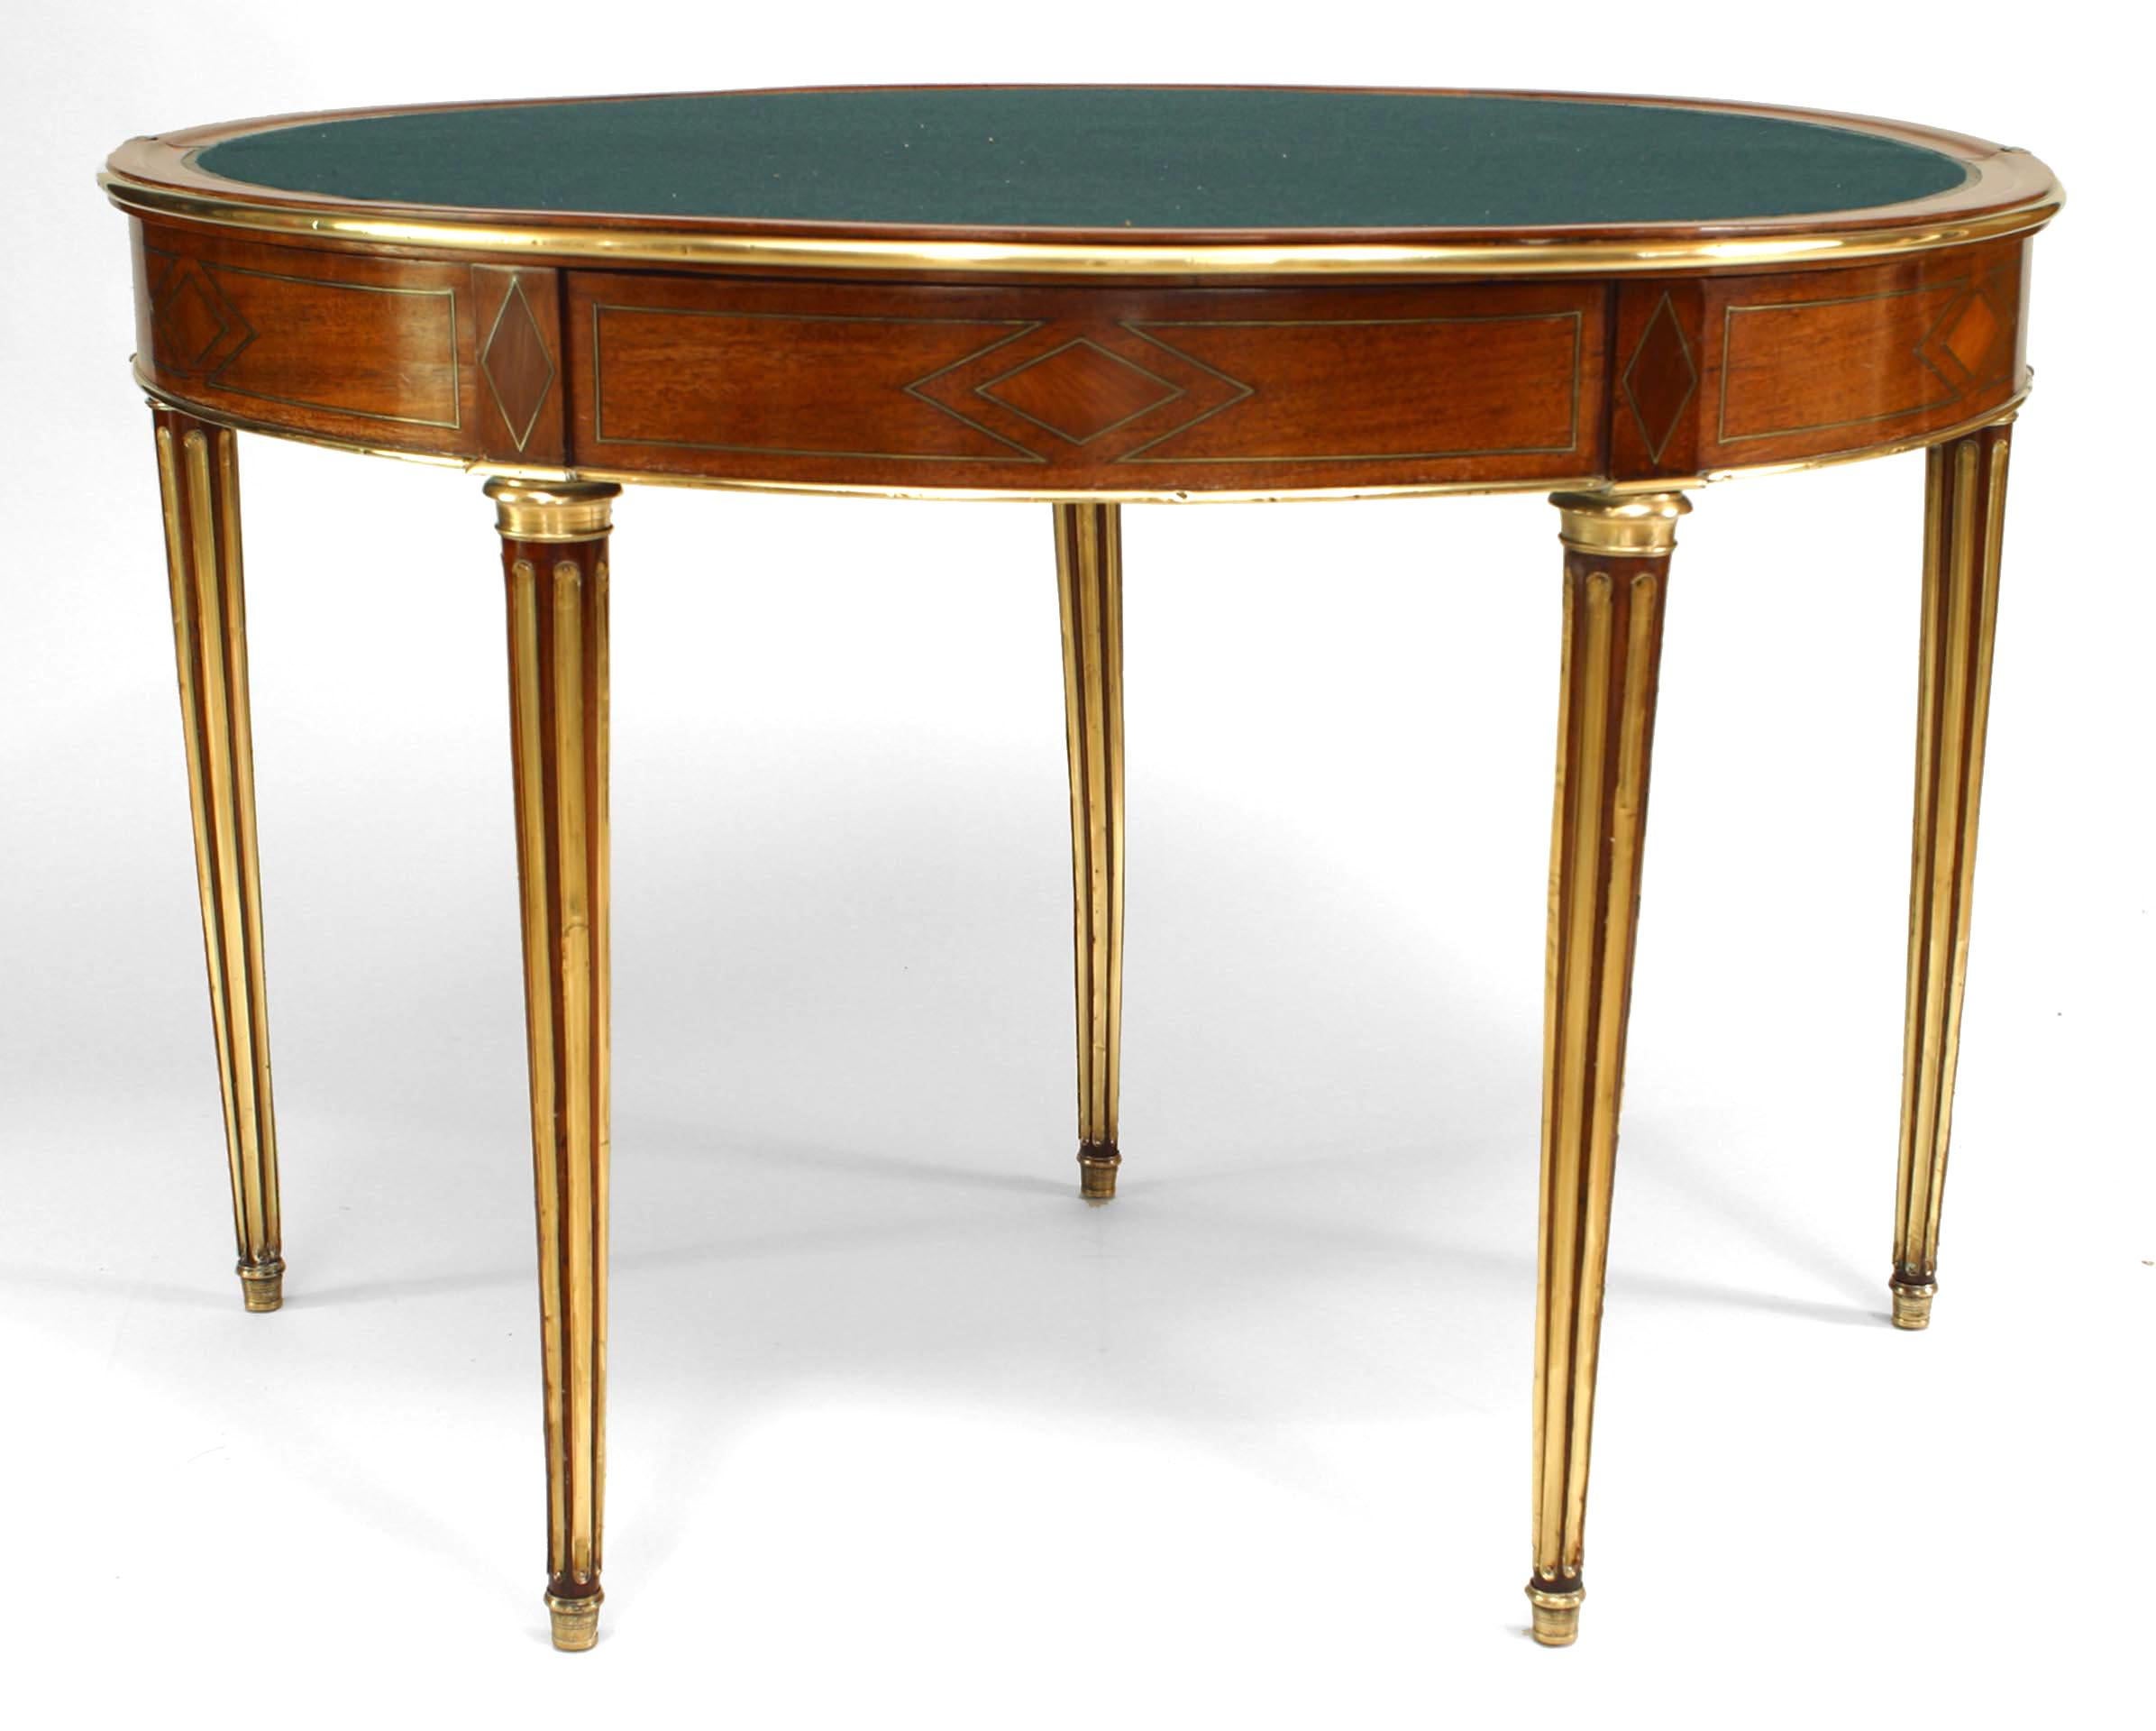 French Louis XVI mahogany and inlaid flip top demilune shaped console card table with brass fluted legs and trim with green felt top with fifth leg as drawer
